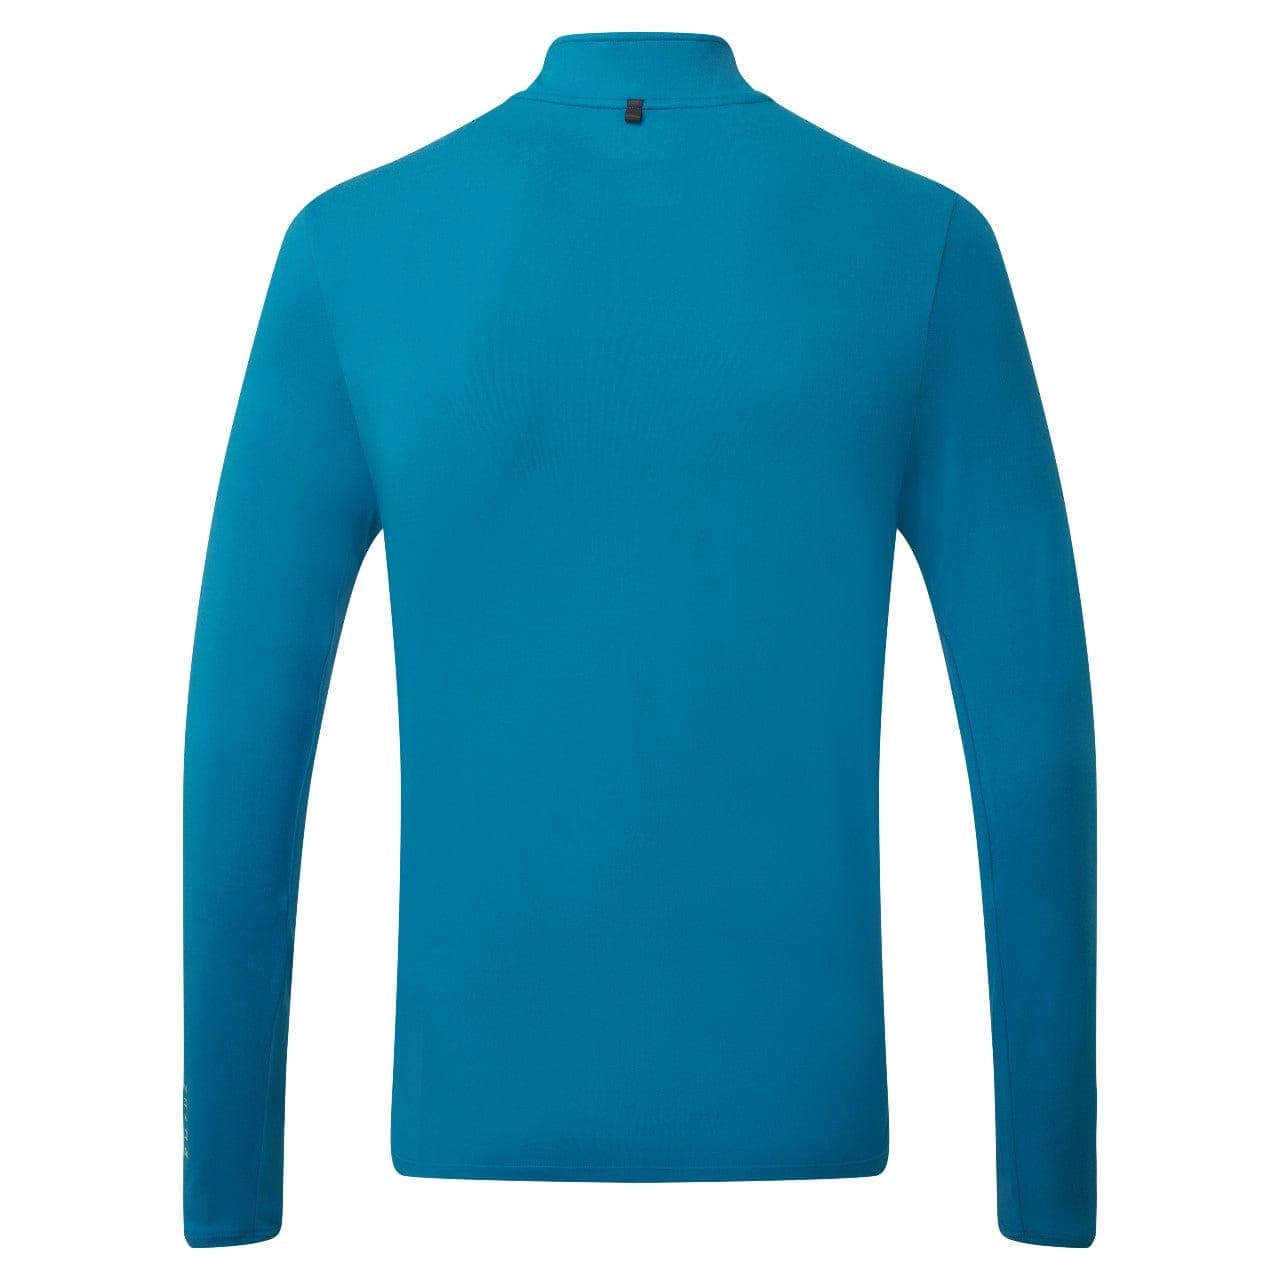 Ronhill Tech Thermal 1/2 Zip Tee  (Mens) - Prussian Blue/Willow